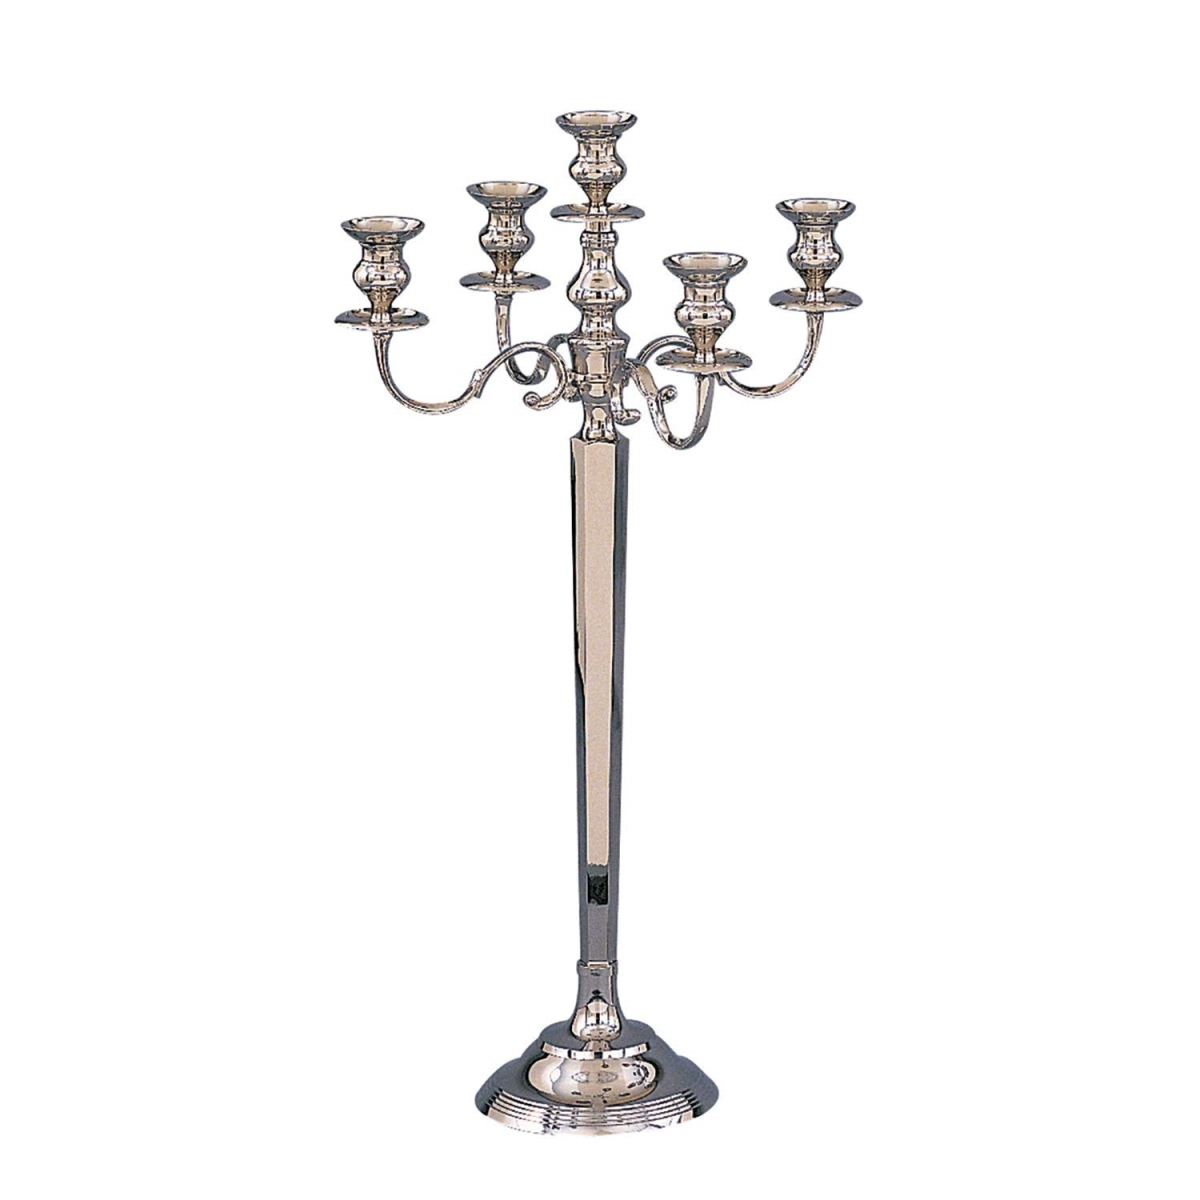 90442 34 In. Nickel Plate 5 Light Candelabra With Bowl